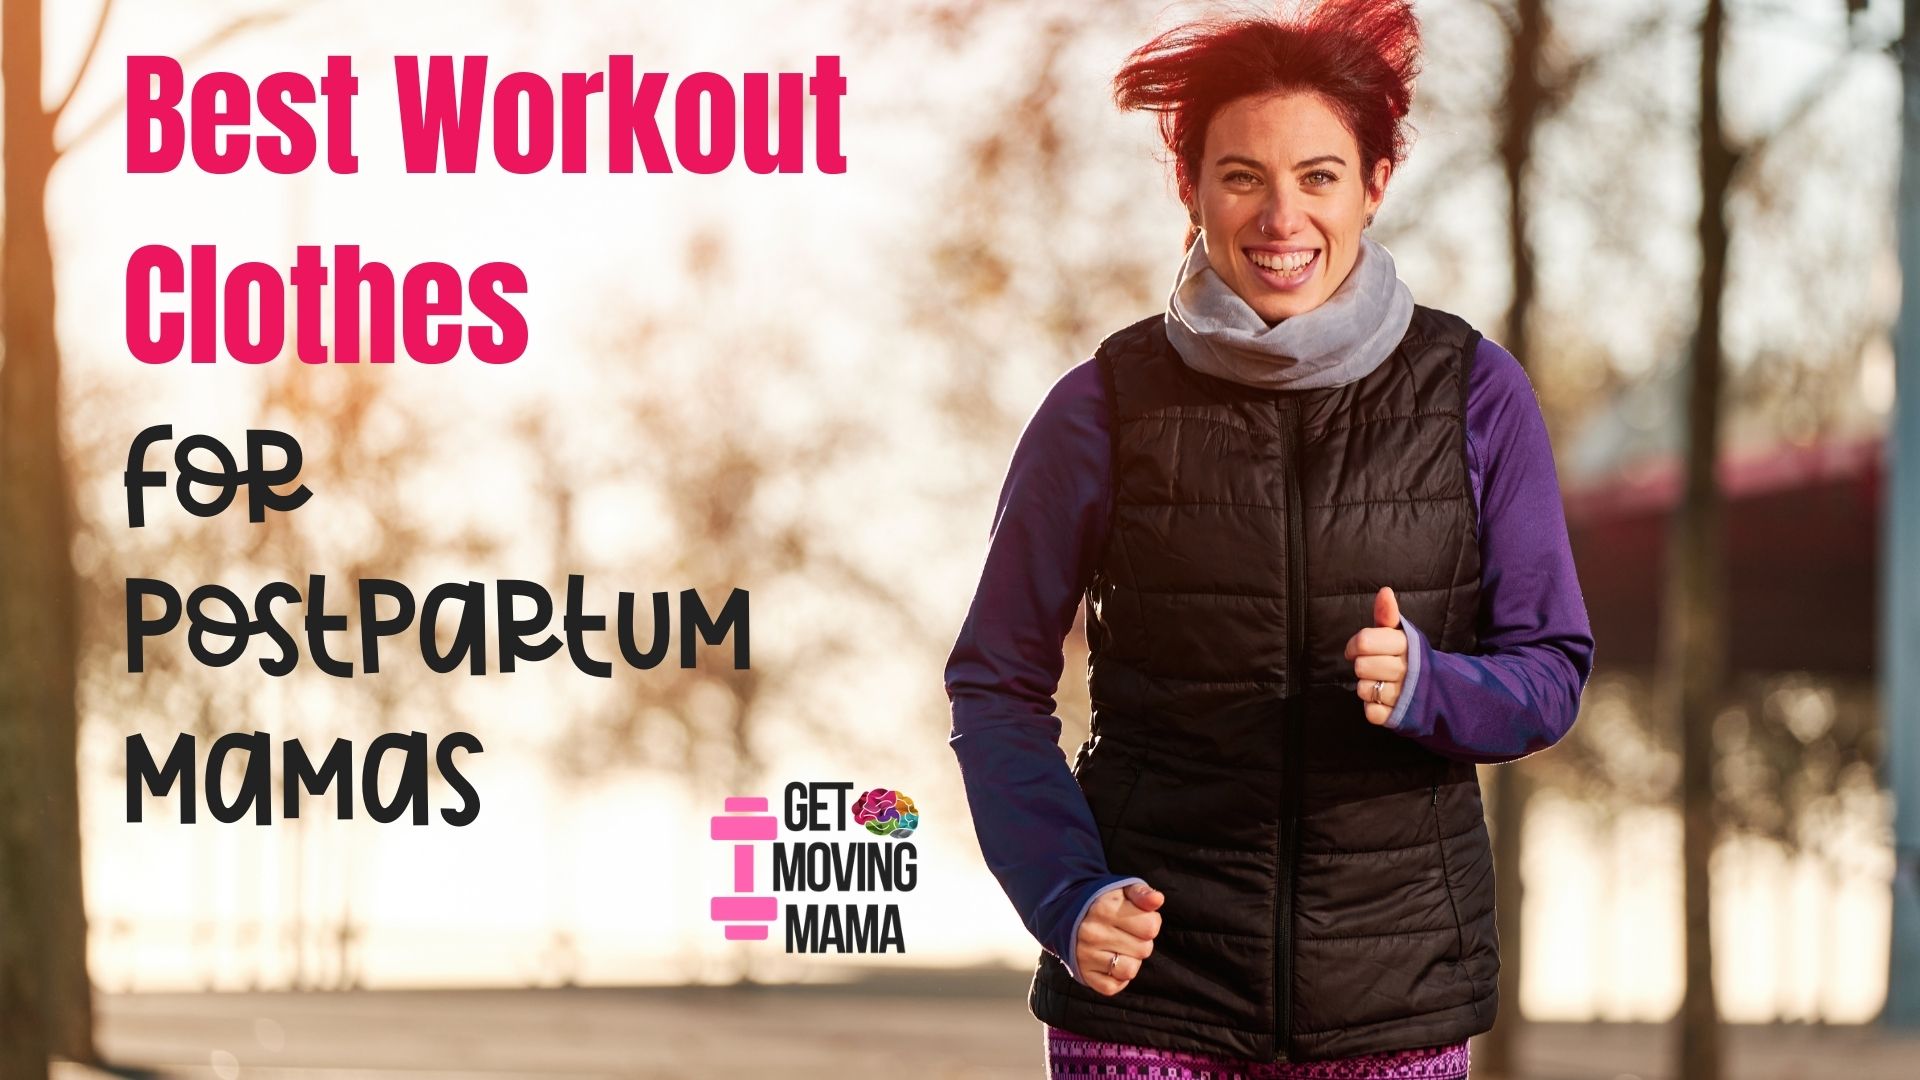 Find the Best Workout Clothes for Postpartum Moms